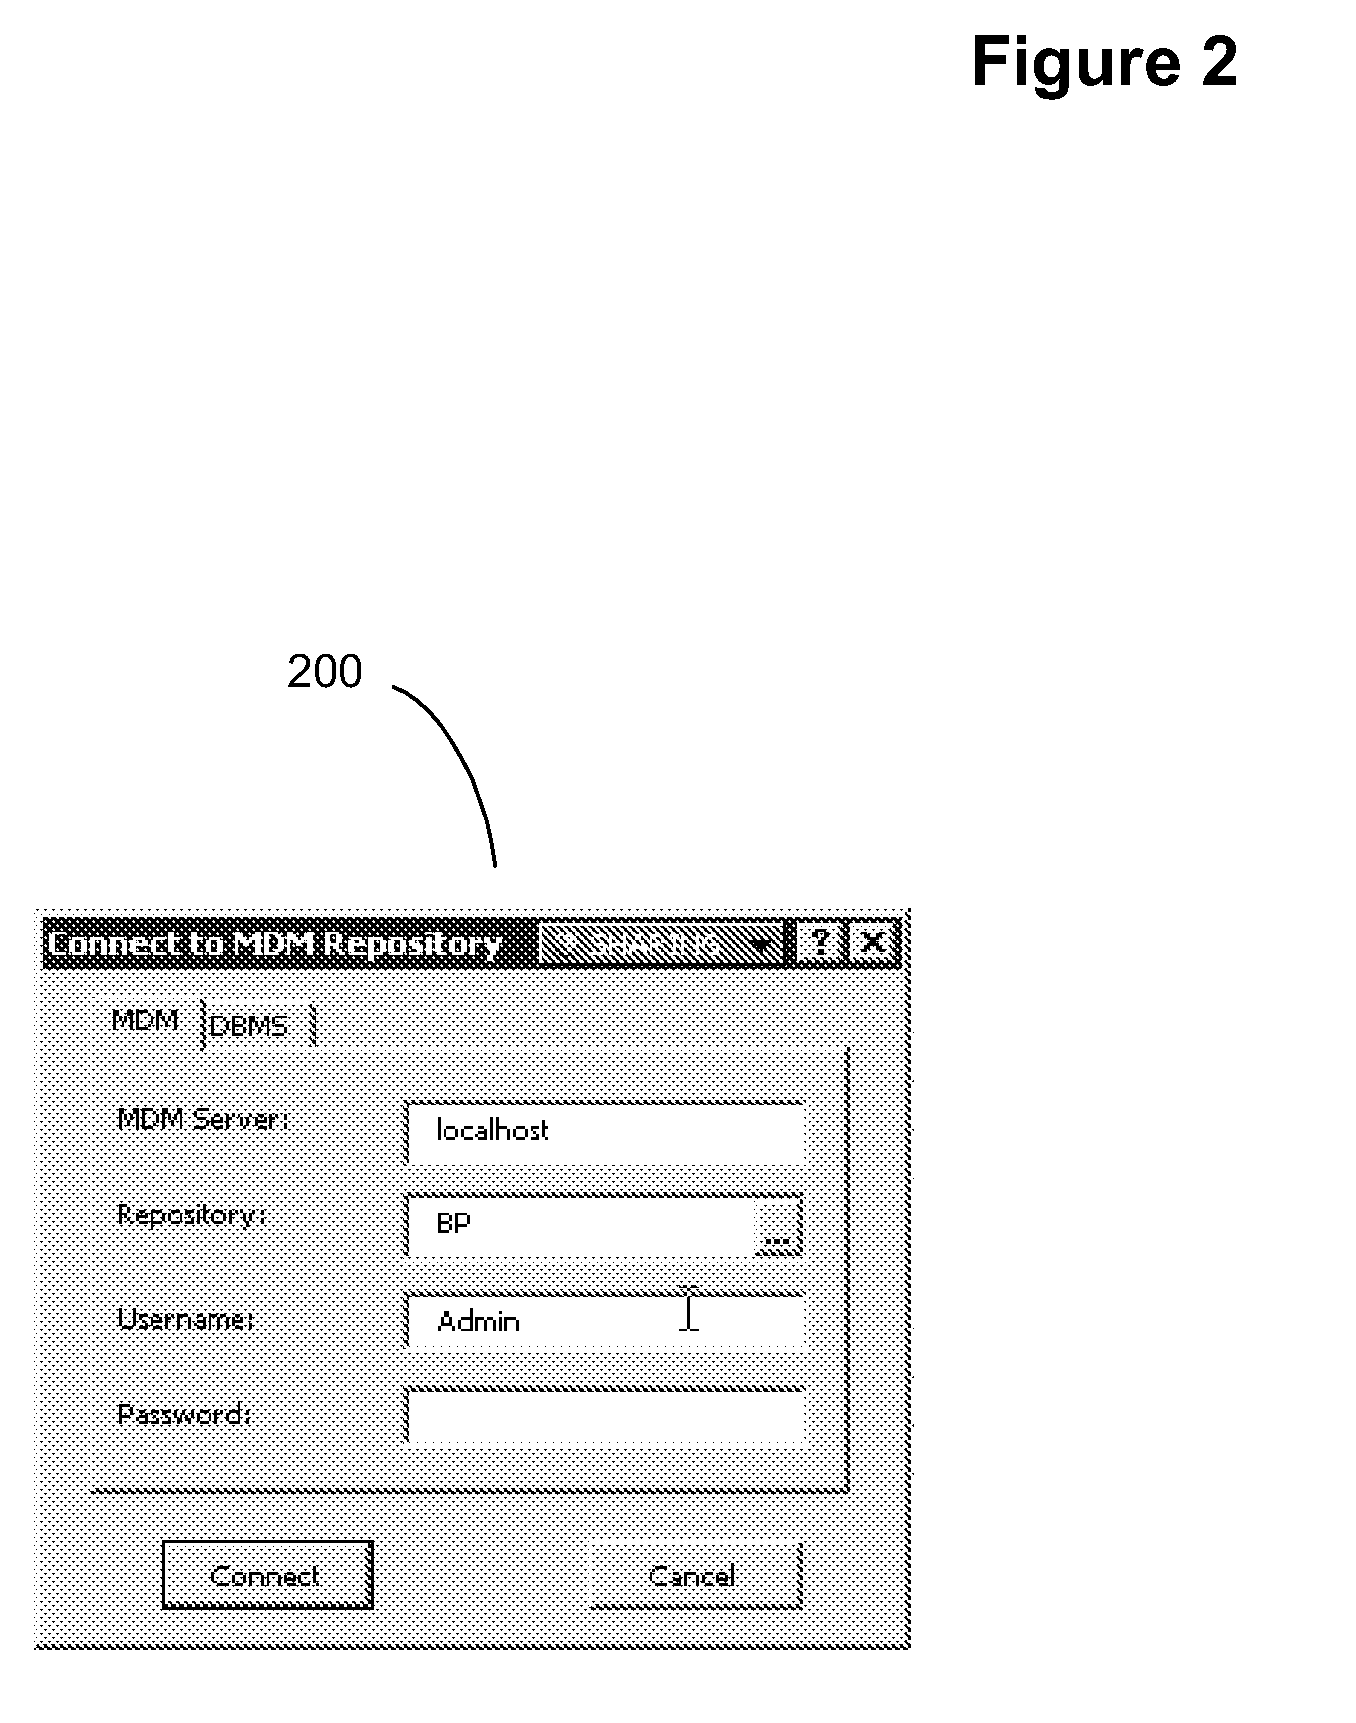 Data generator apparatus testing data dependent applications, verifying schemas and sizing systems